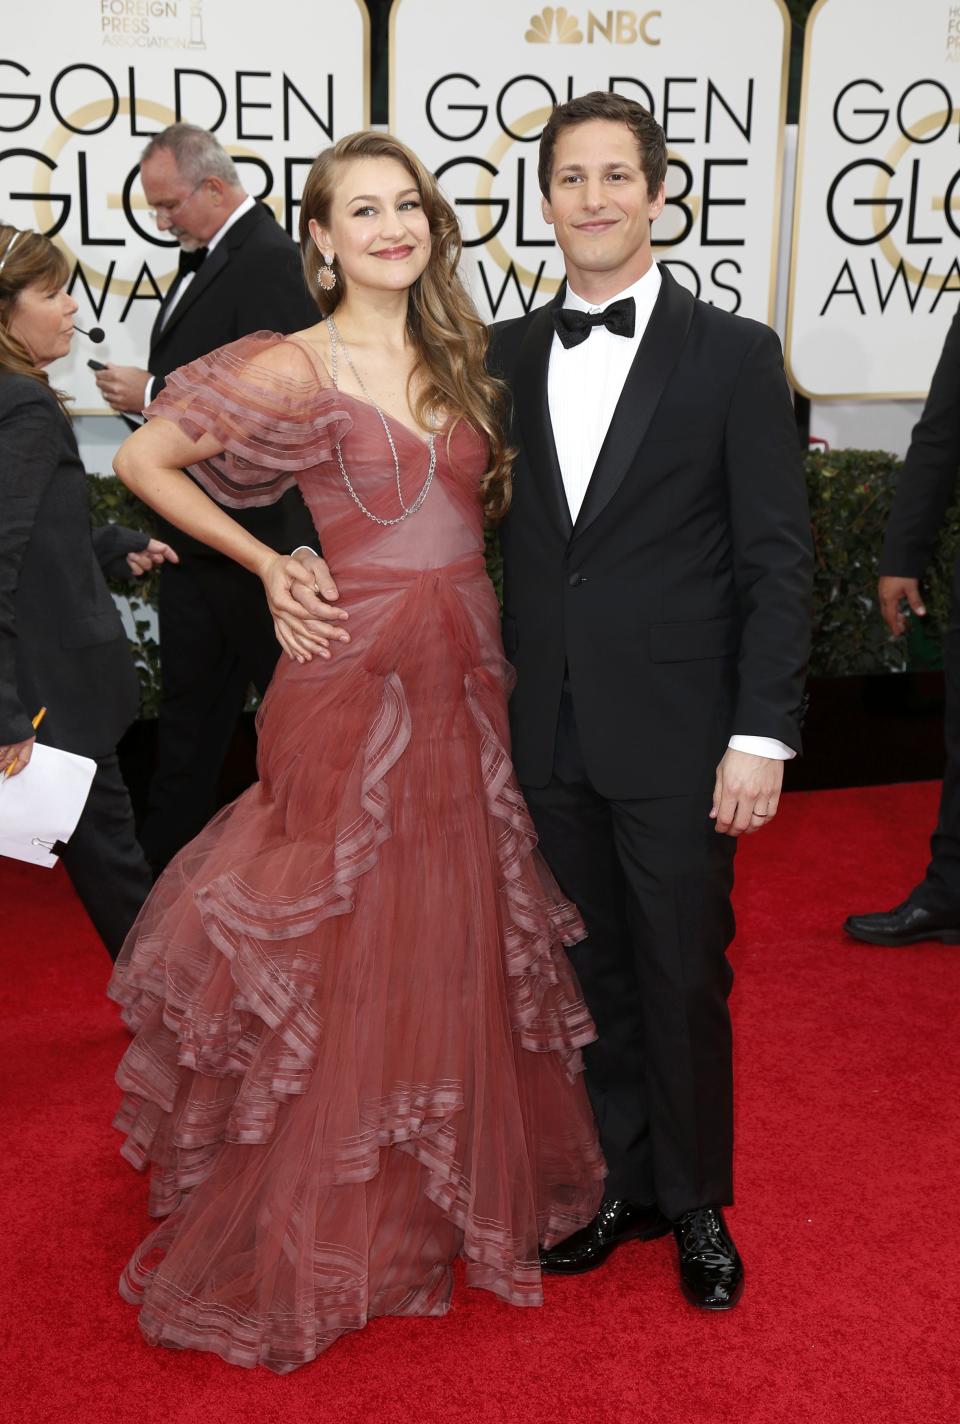 Musician Joanna Newsom and actor Andy Samberg arrive at the 71st annual Golden Globe Awards in Beverly Hills, California January 12, 2014. REUTERS/Danny Moloshok (UNITED STATES - Tags: Entertainment)(GOLDENGLOBES-ARRIVALS)